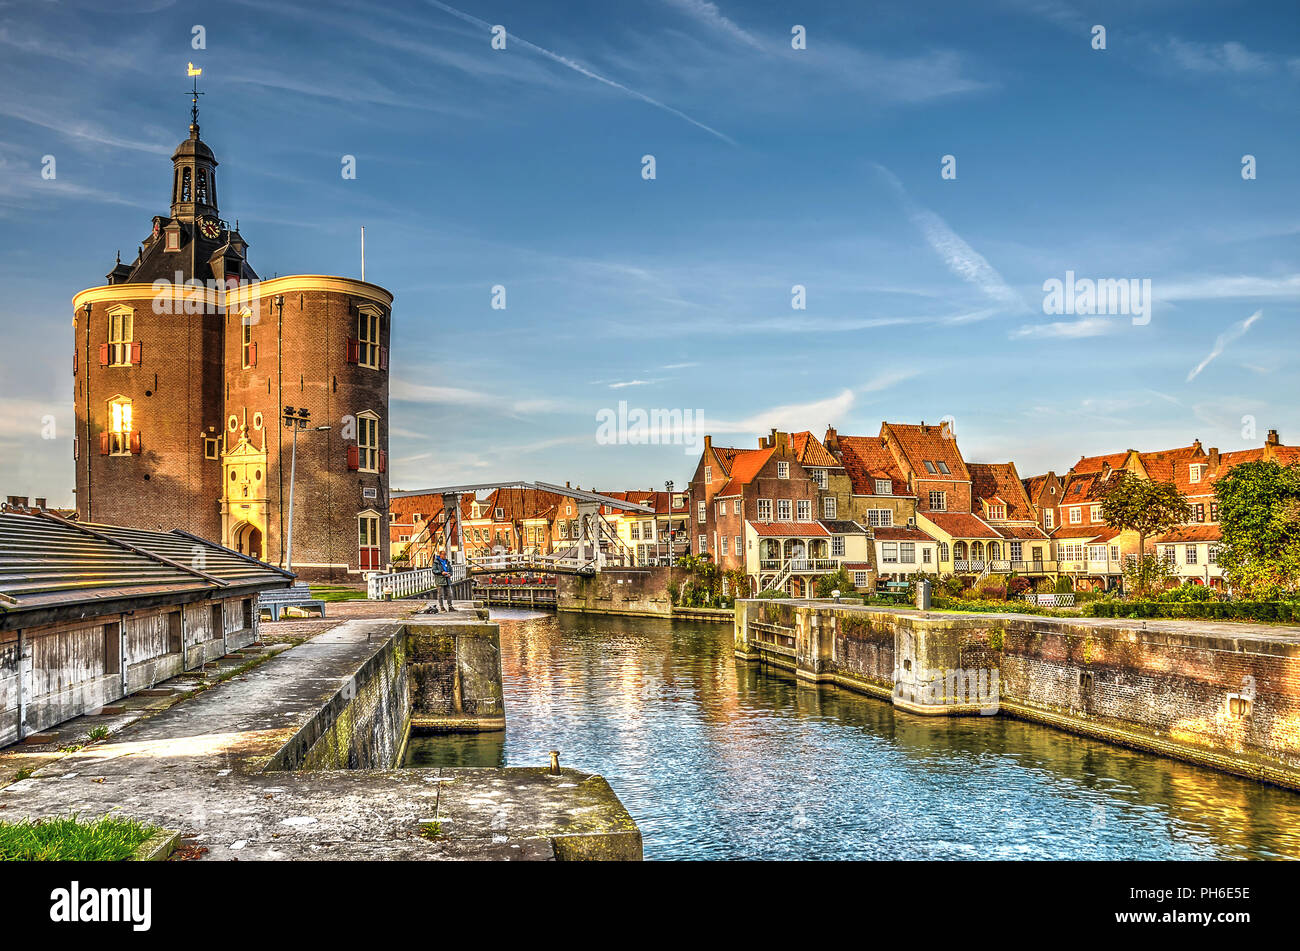 Enkhuizen, The Netherlands, October 26, 2015: View of the Old Harbour and Dromedaris Gate in the golden hour Stock Photo